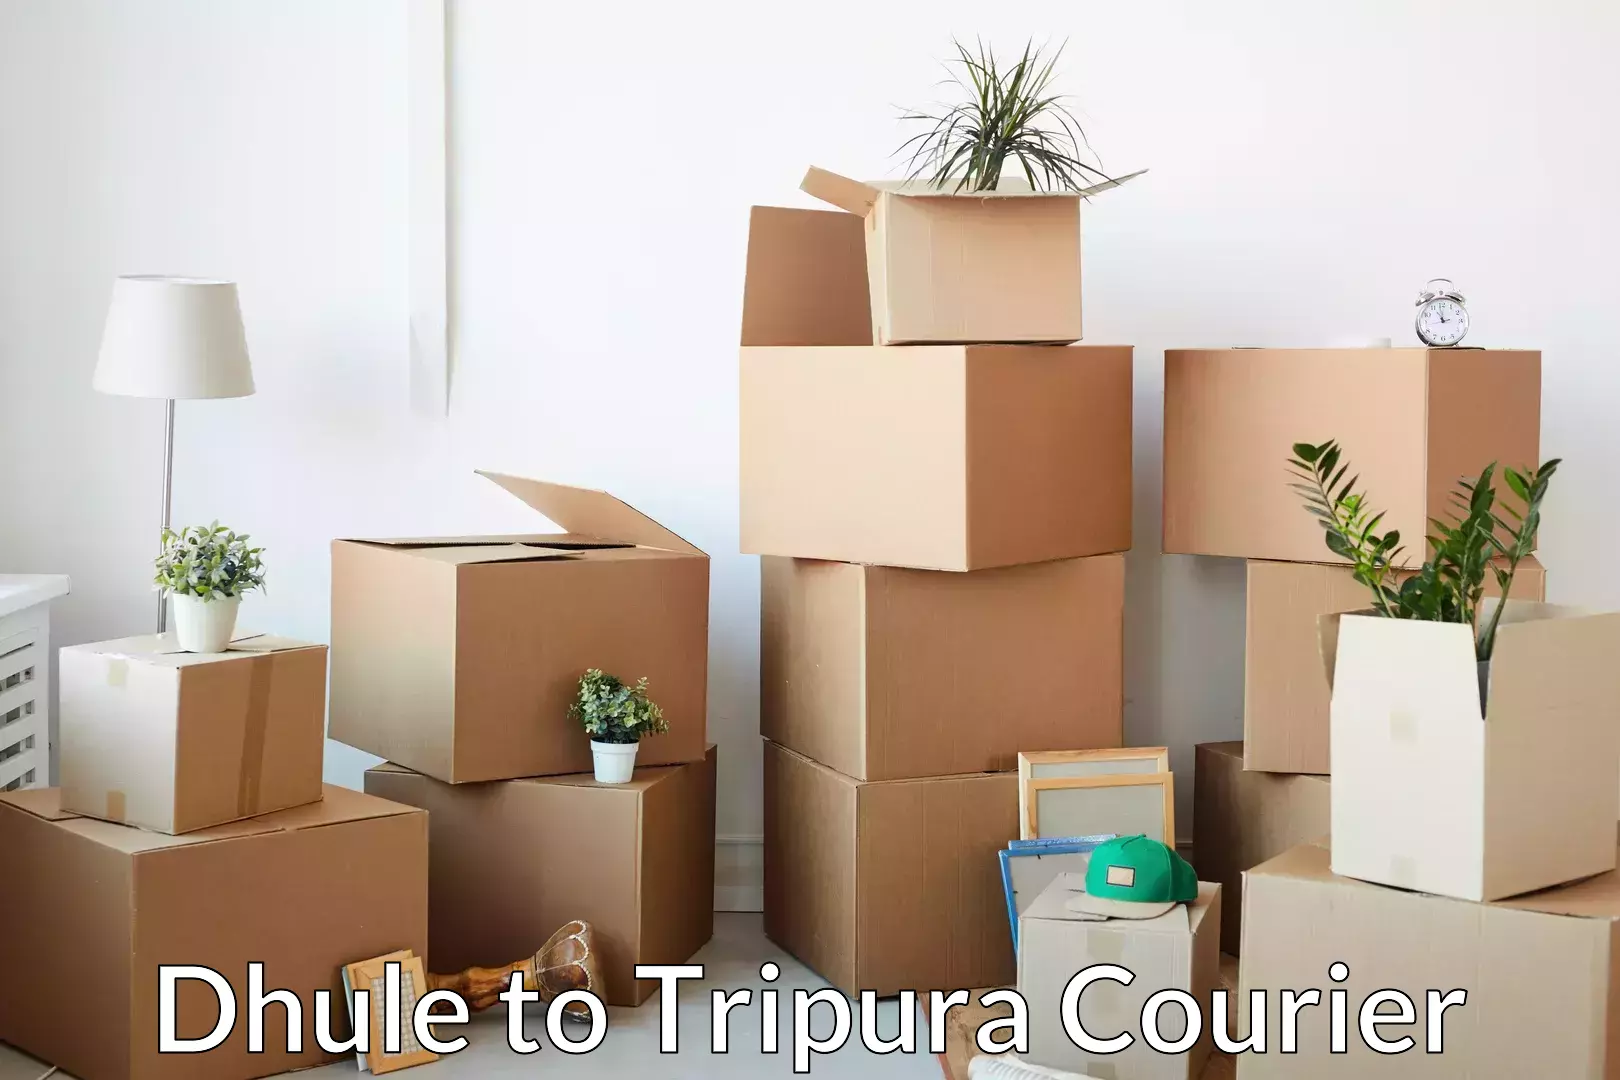 Hassle-free relocation Dhule to Udaipur Tripura